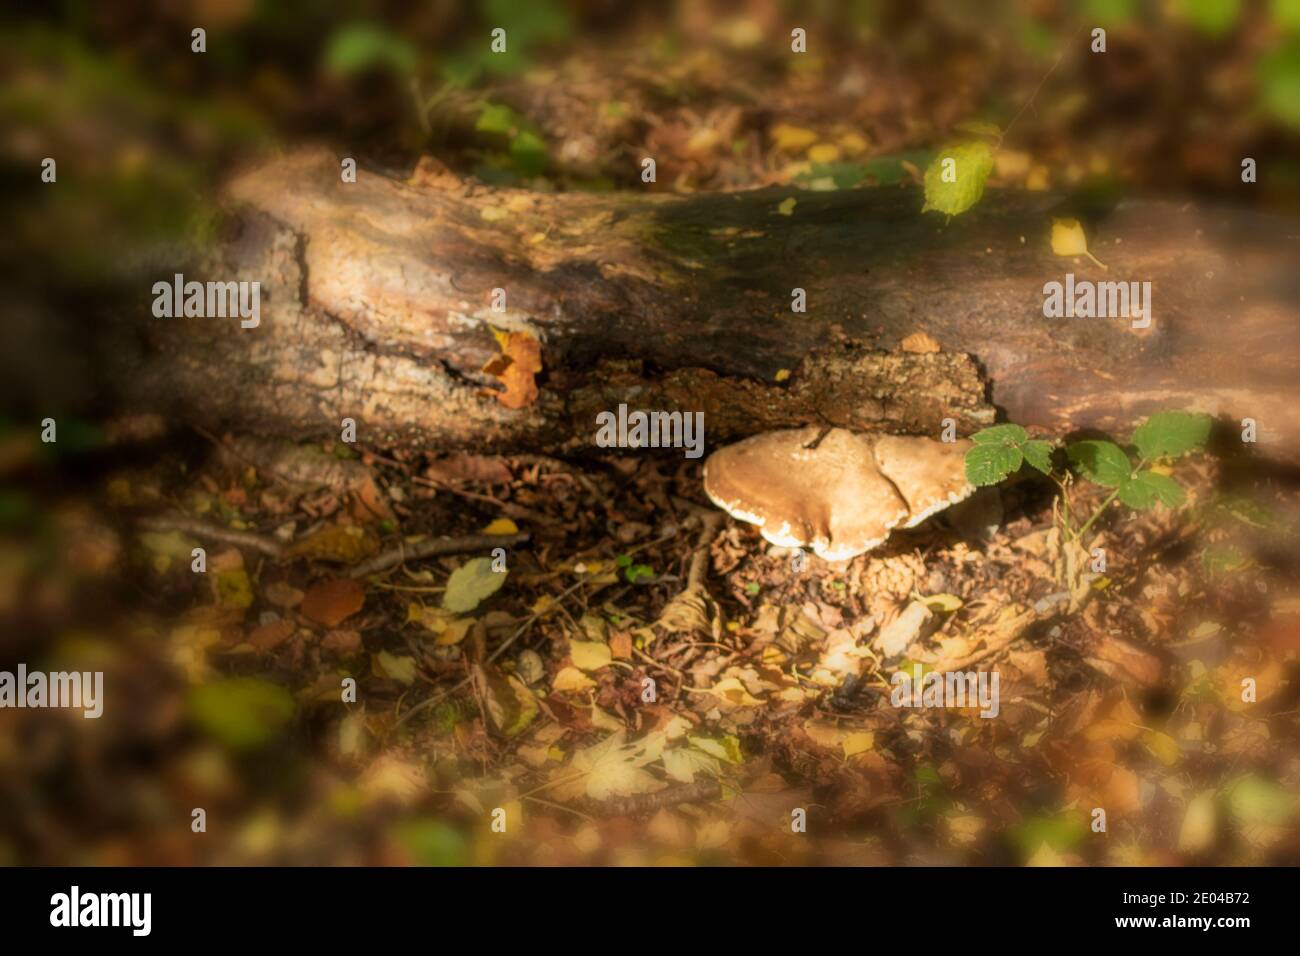 Fomitopsis betulina, birch polypore, natures recyclers Stock Photo